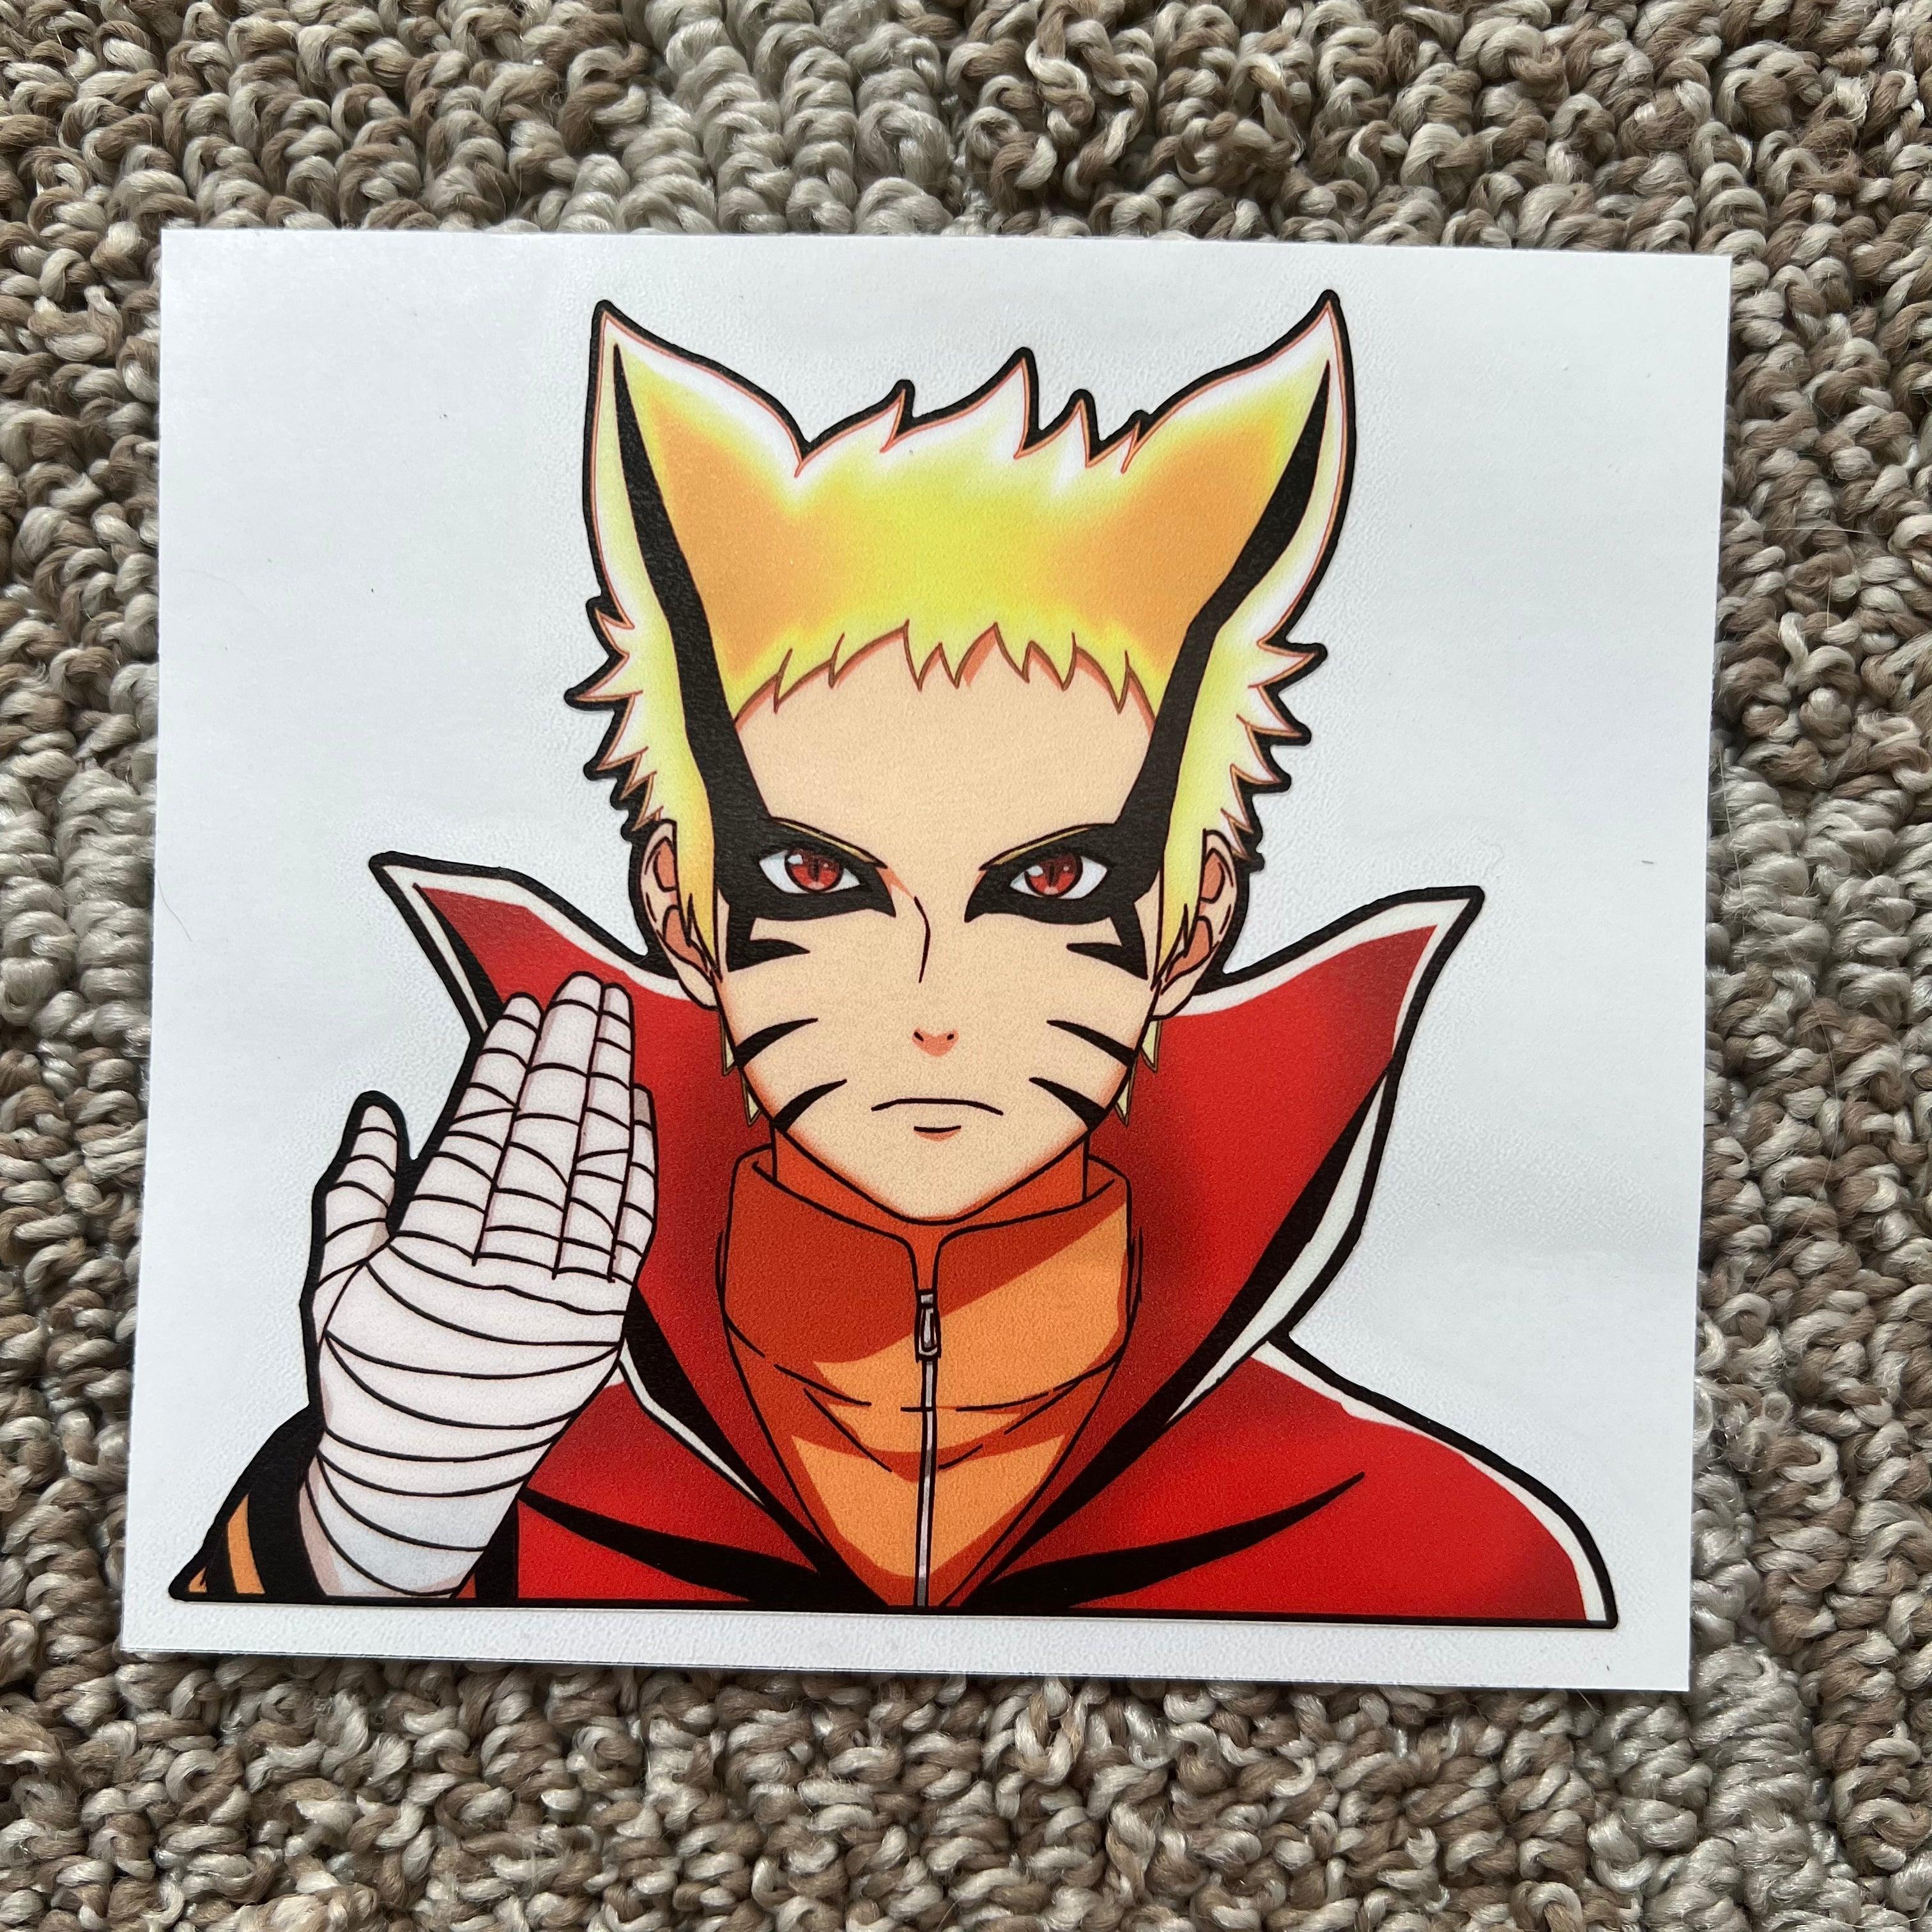 Fighter Waifu Stickers for Car Bumpers, Laptops, Phones, Gifts – Nekodecal